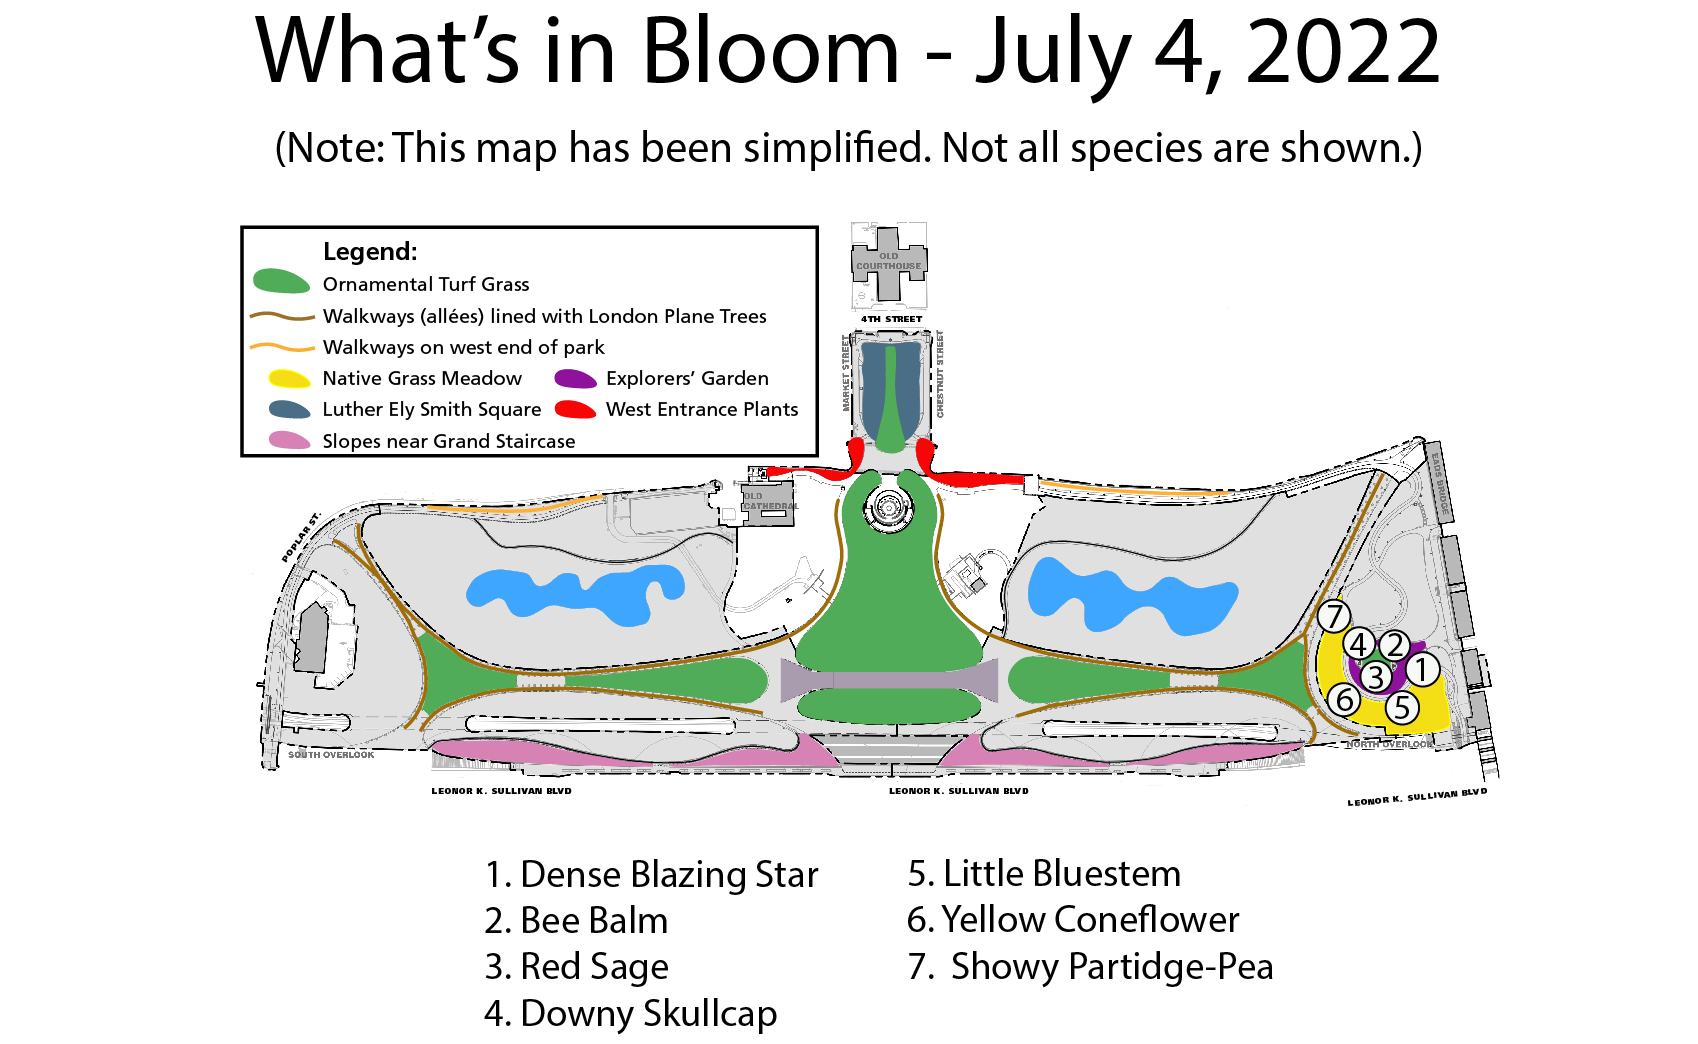 A map of the park's grounds overlaid with blotches of many colors indicating the different planting areas. A legend above the map shows what planting areas are represented by the colors. Circled numbers represent blooming plant species found in each area.